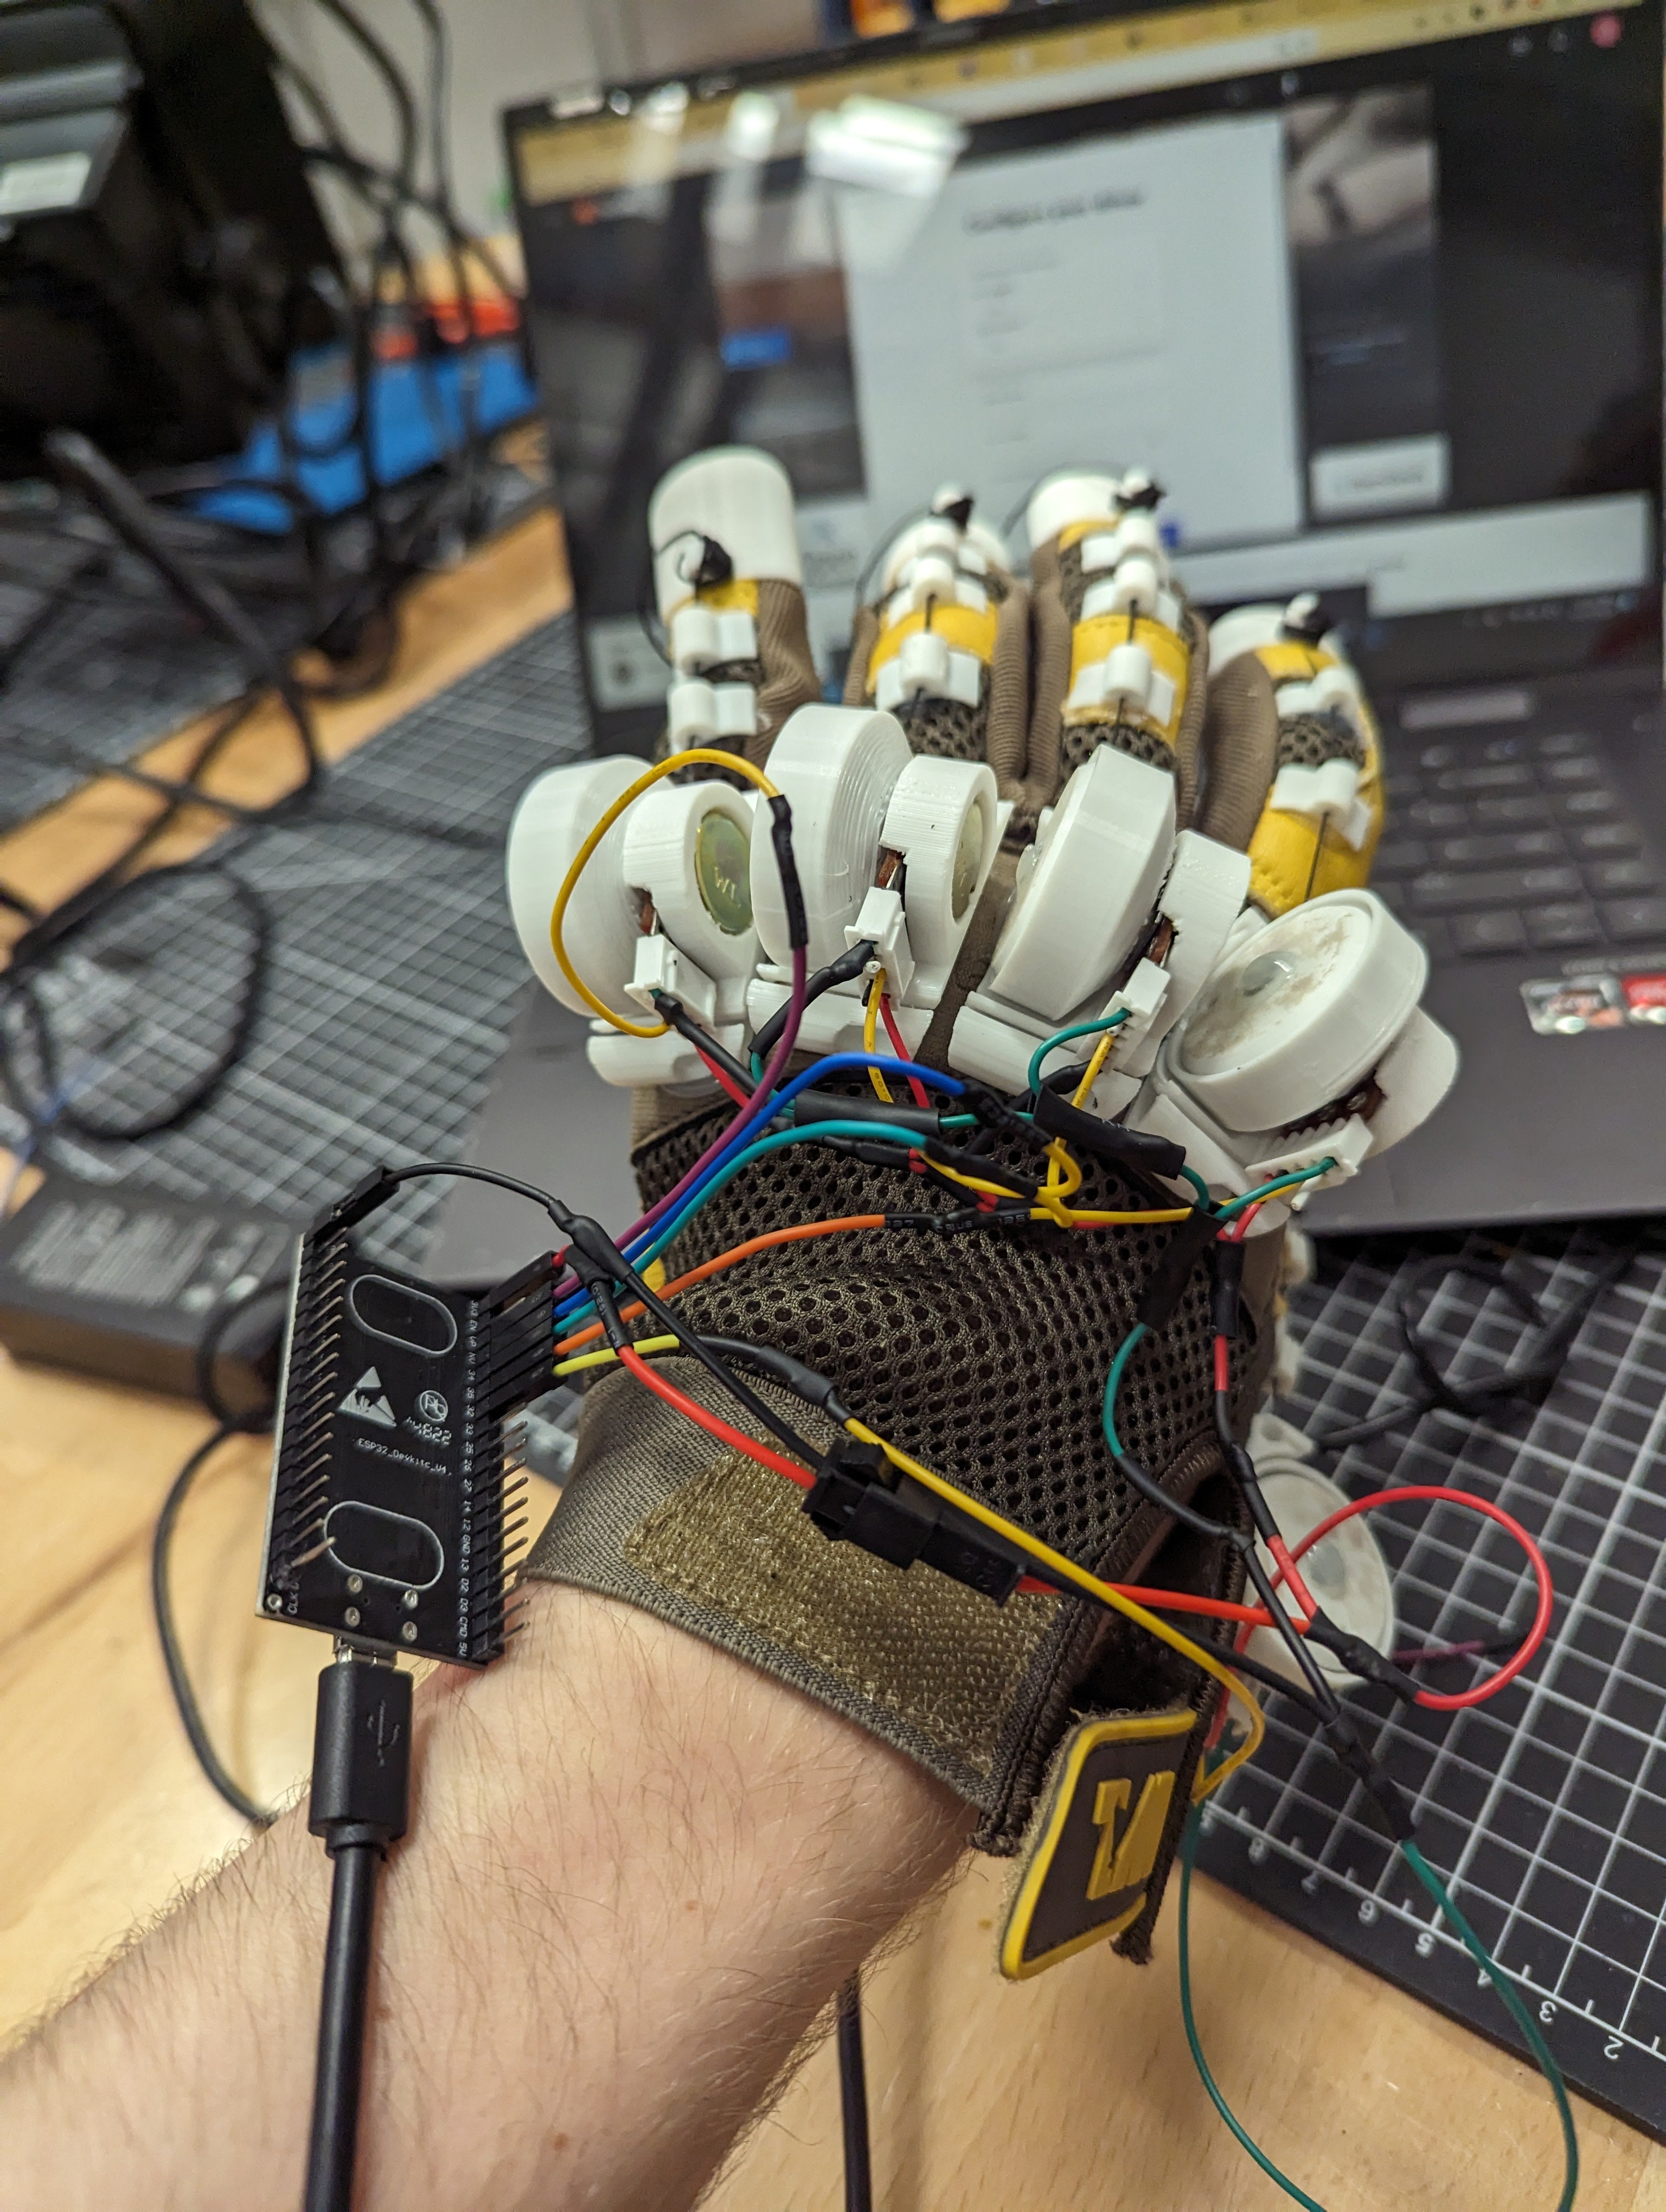 The sensor glove all wired up